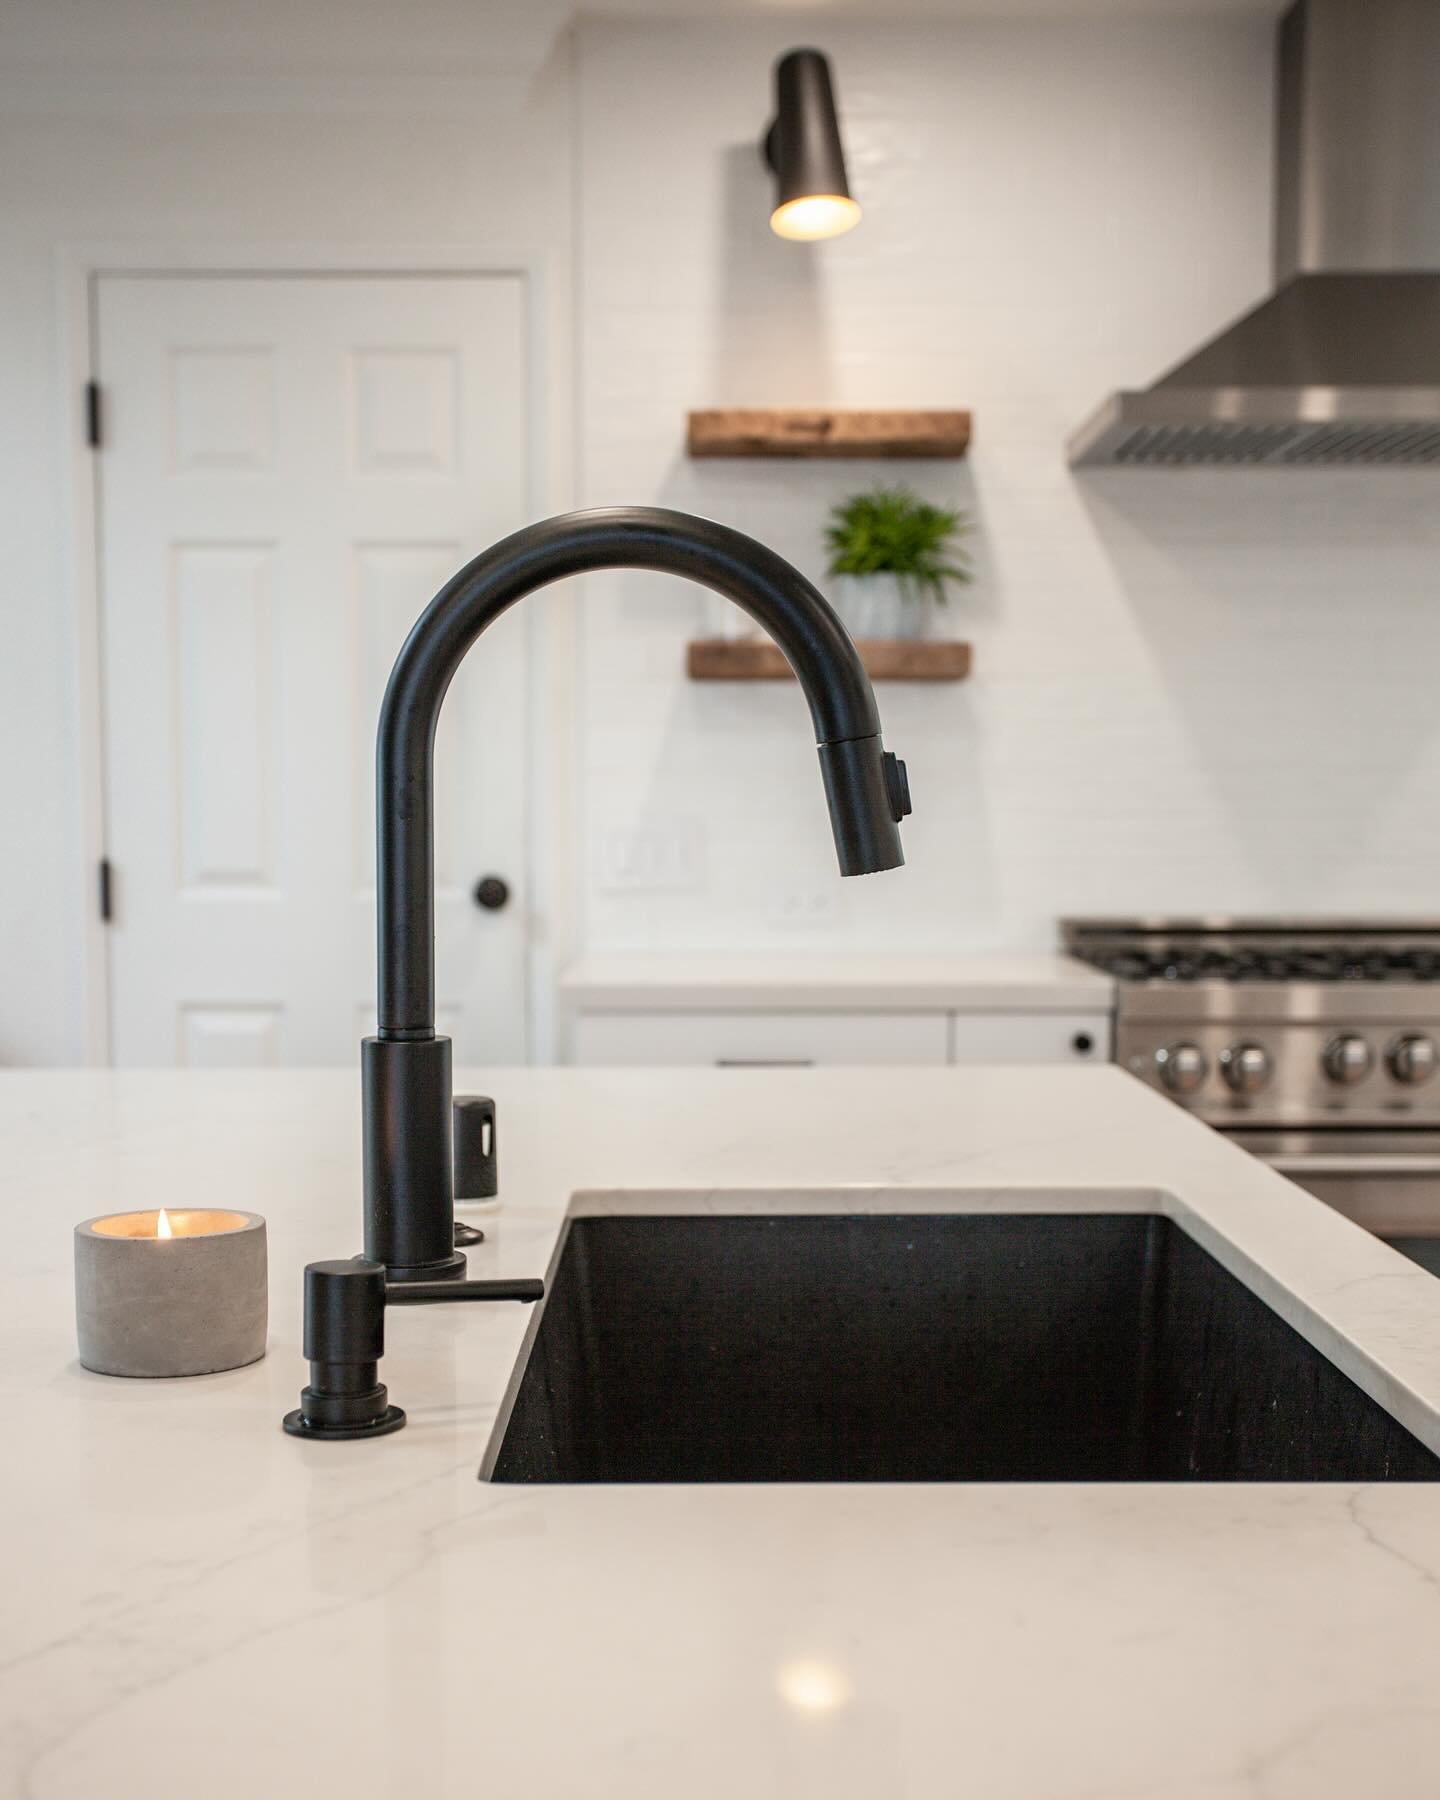 This kitchen designed by Paige and Amber sports pops of black against the white cabinets and countertops. We opted for a black sink along with the black plumbing to emphasize the contrast.